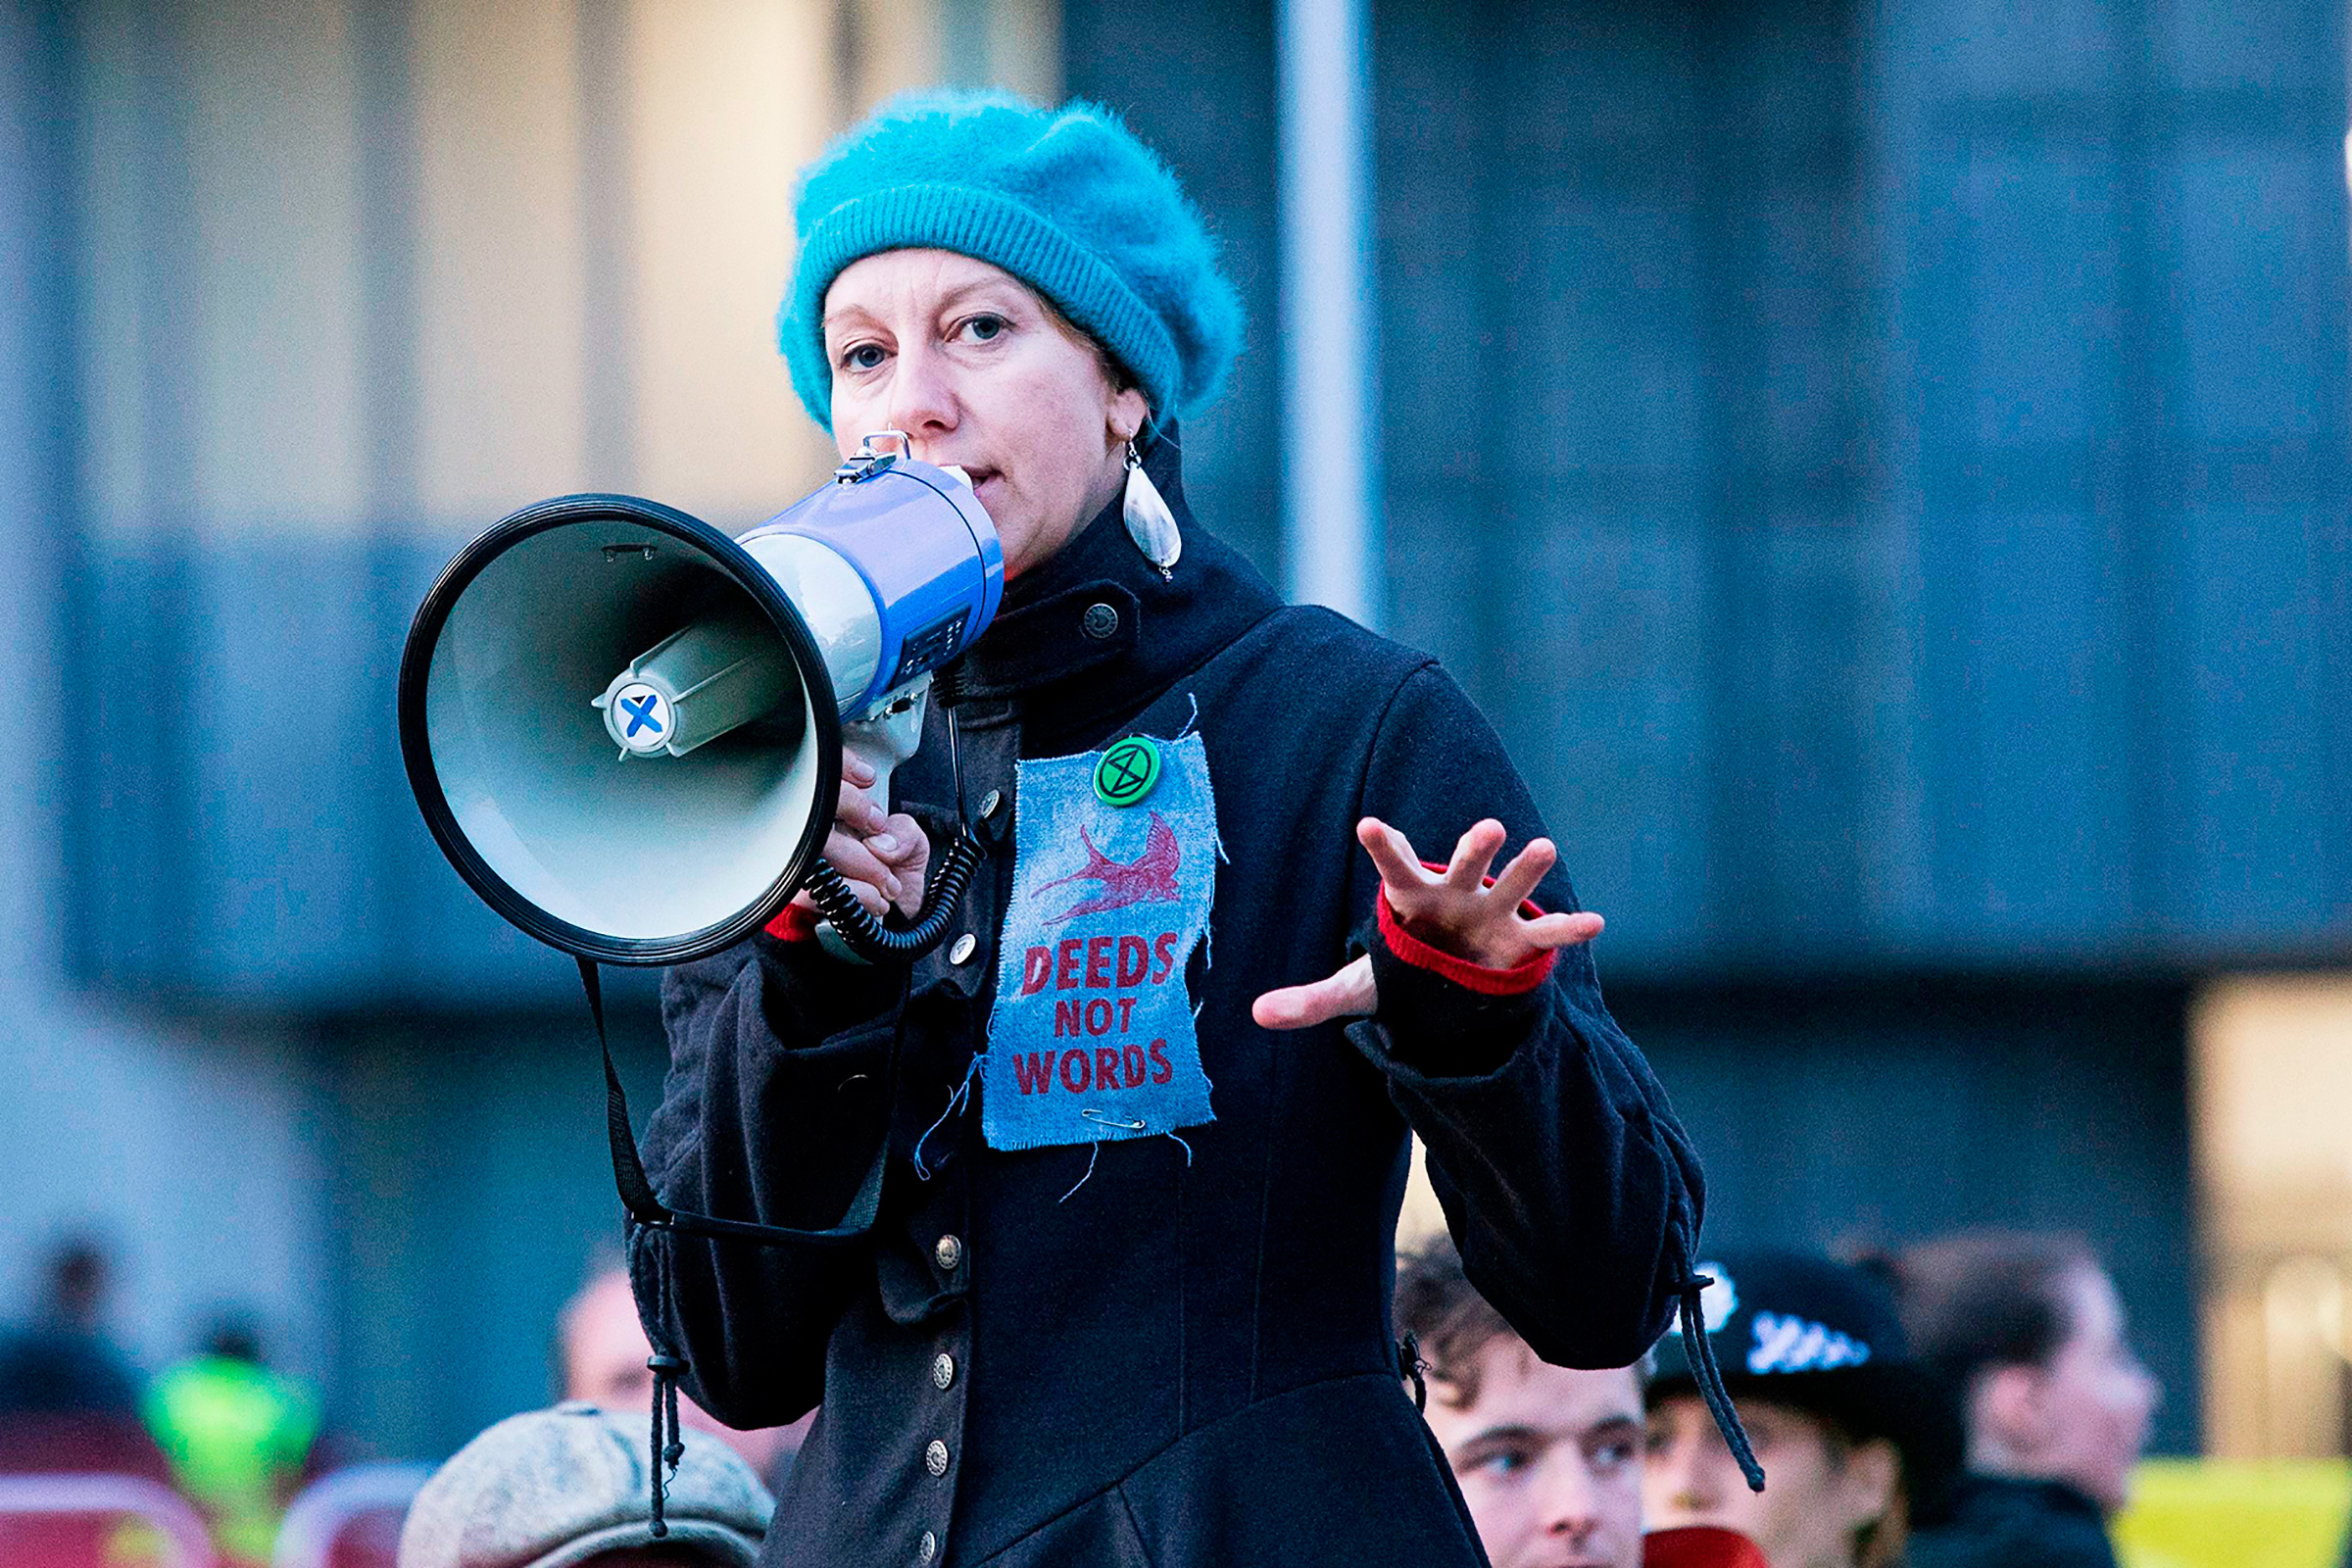 Co-founder Gail Bradbrook speaks to activists blocking a road in Central London on Oct. 9. (George Cracknell Wright—LNP/Shutterstock)